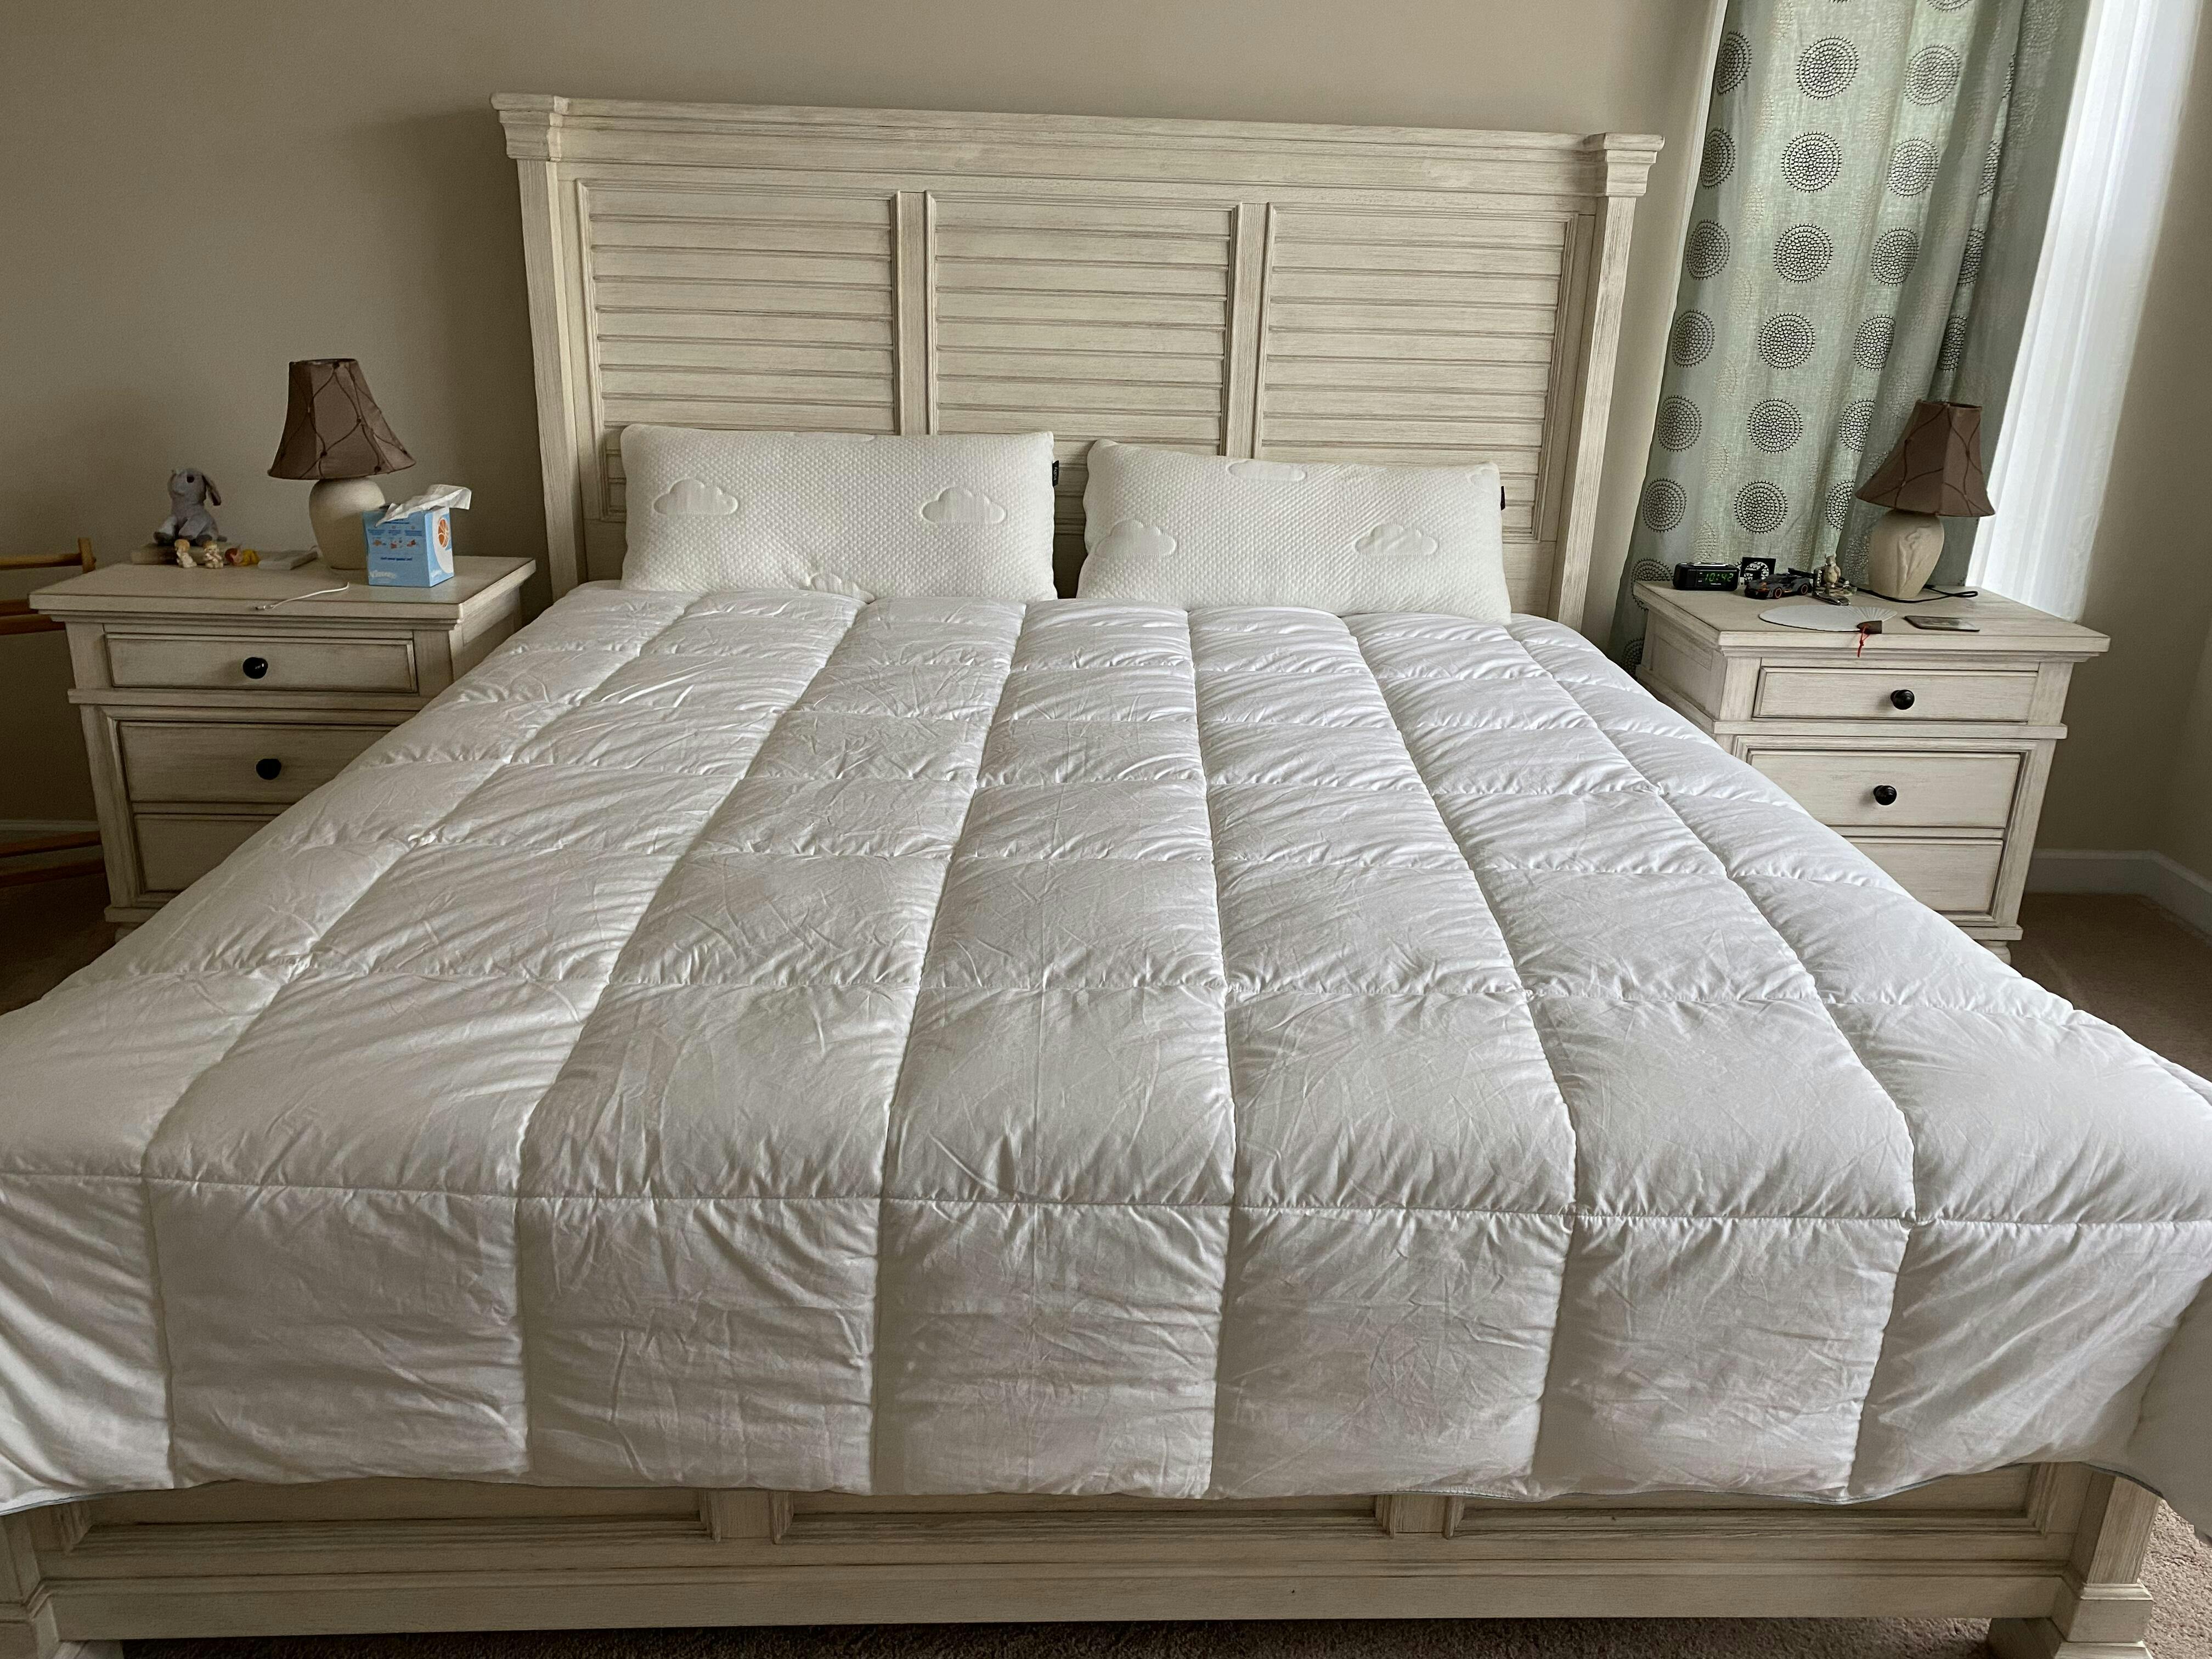 can puffy mattress go on metal frame